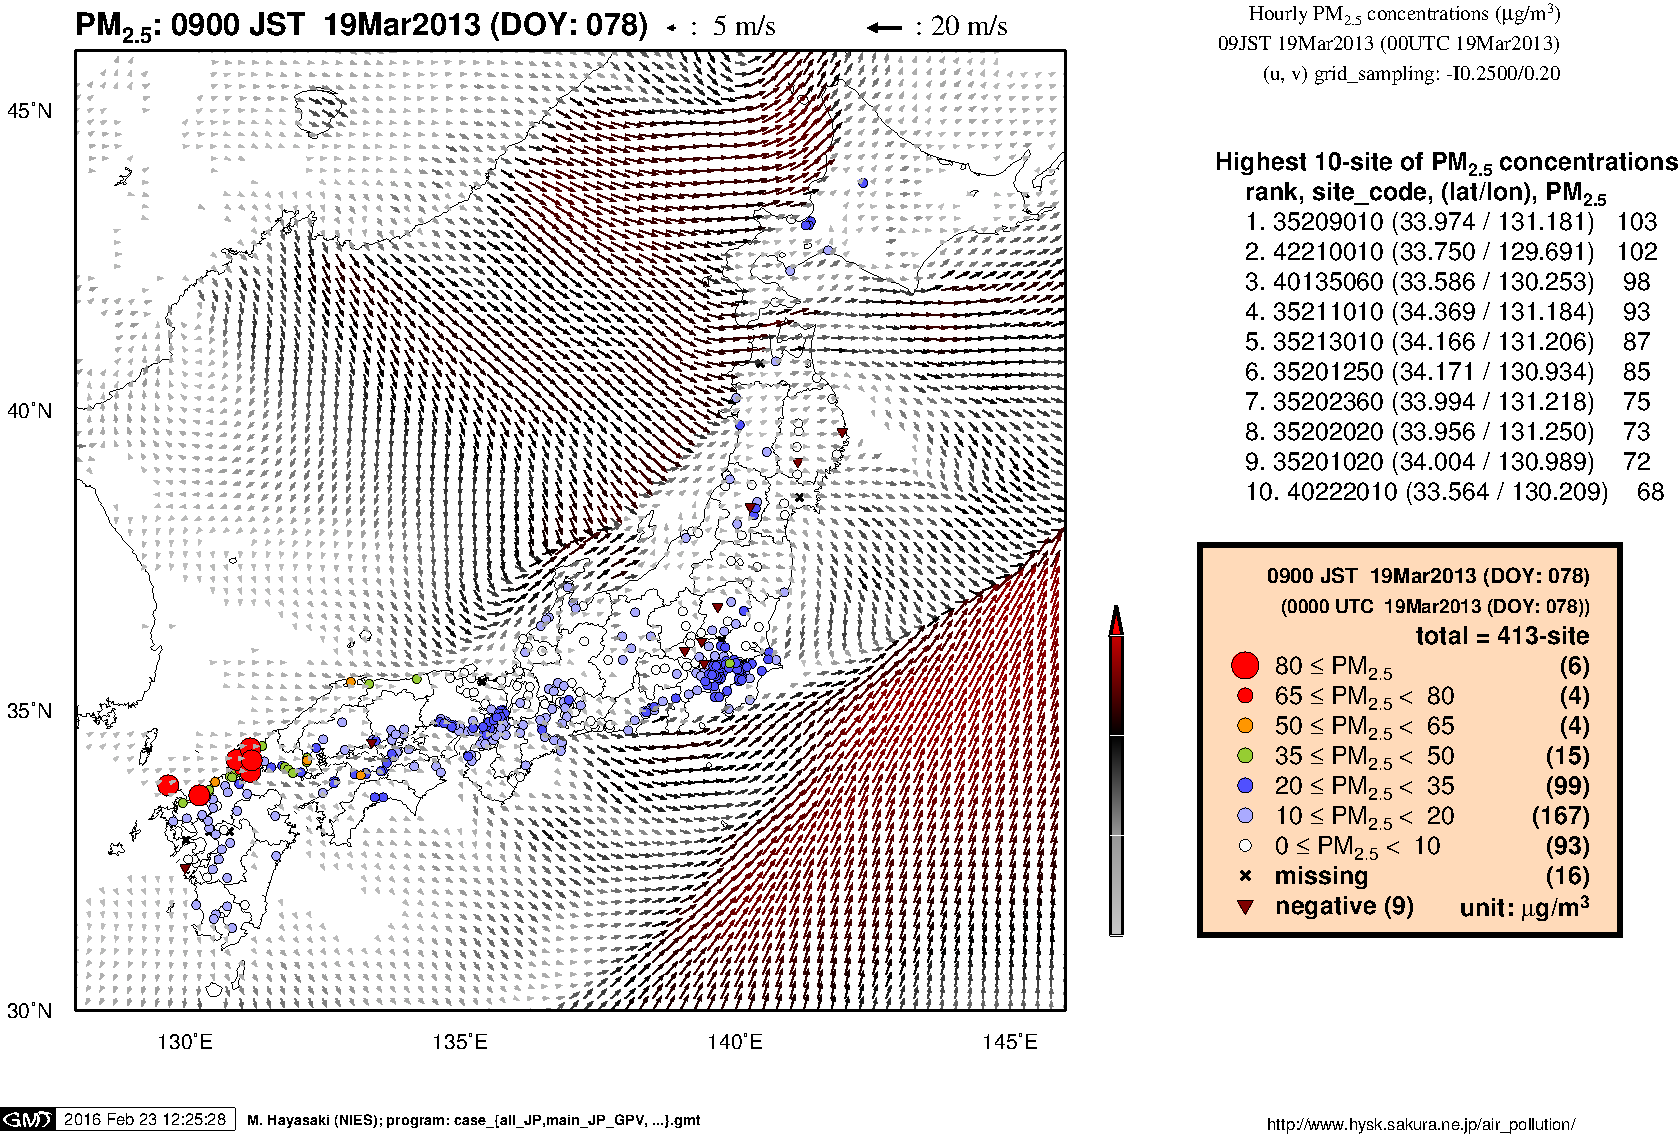 PM2.5 concentration in mainland Japan (09JST 19Mar2013)